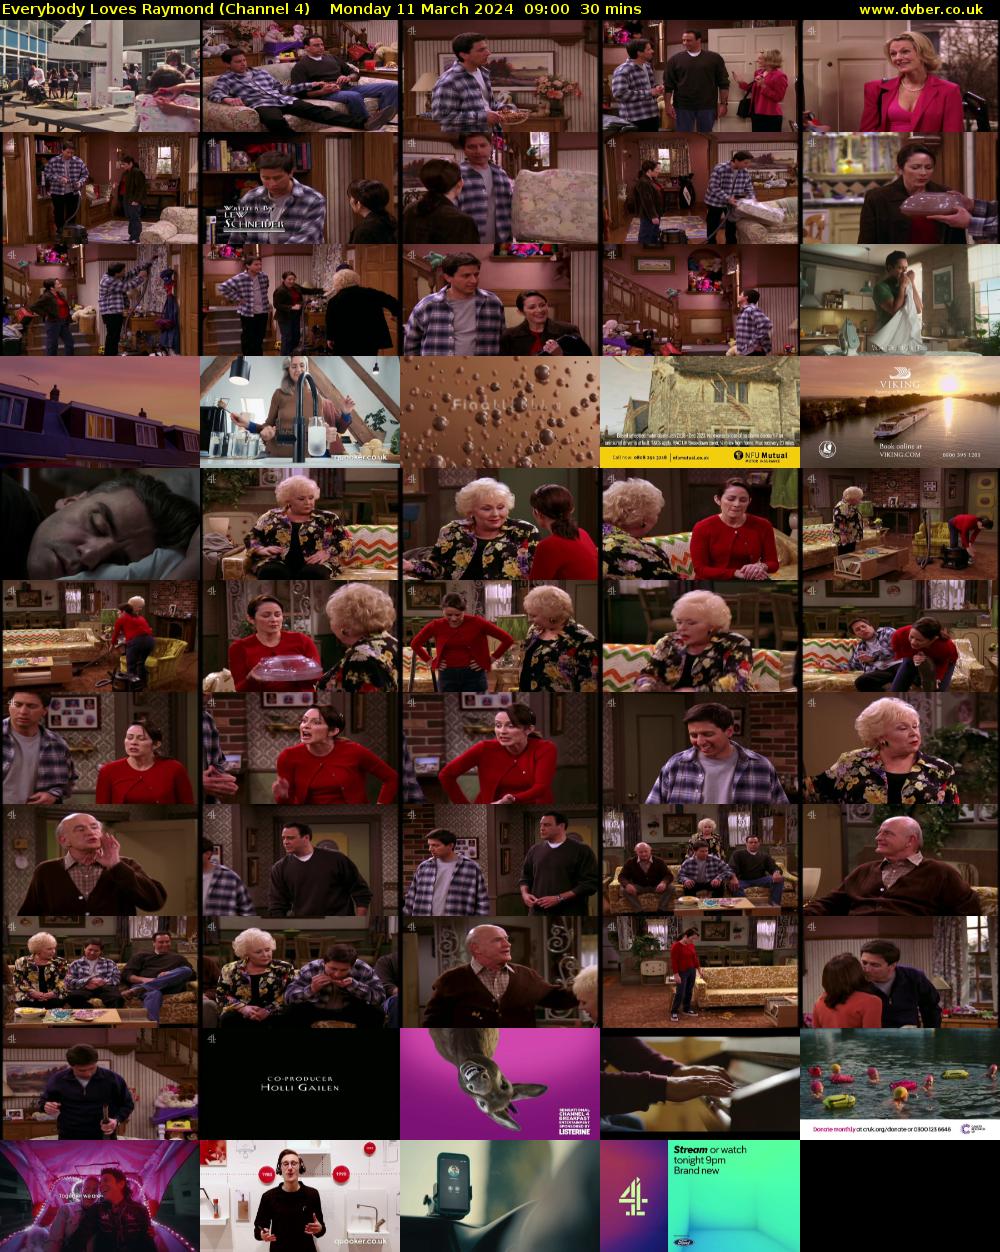 Everybody Loves Raymond (Channel 4) Monday 11 March 2024 09:00 - 09:30